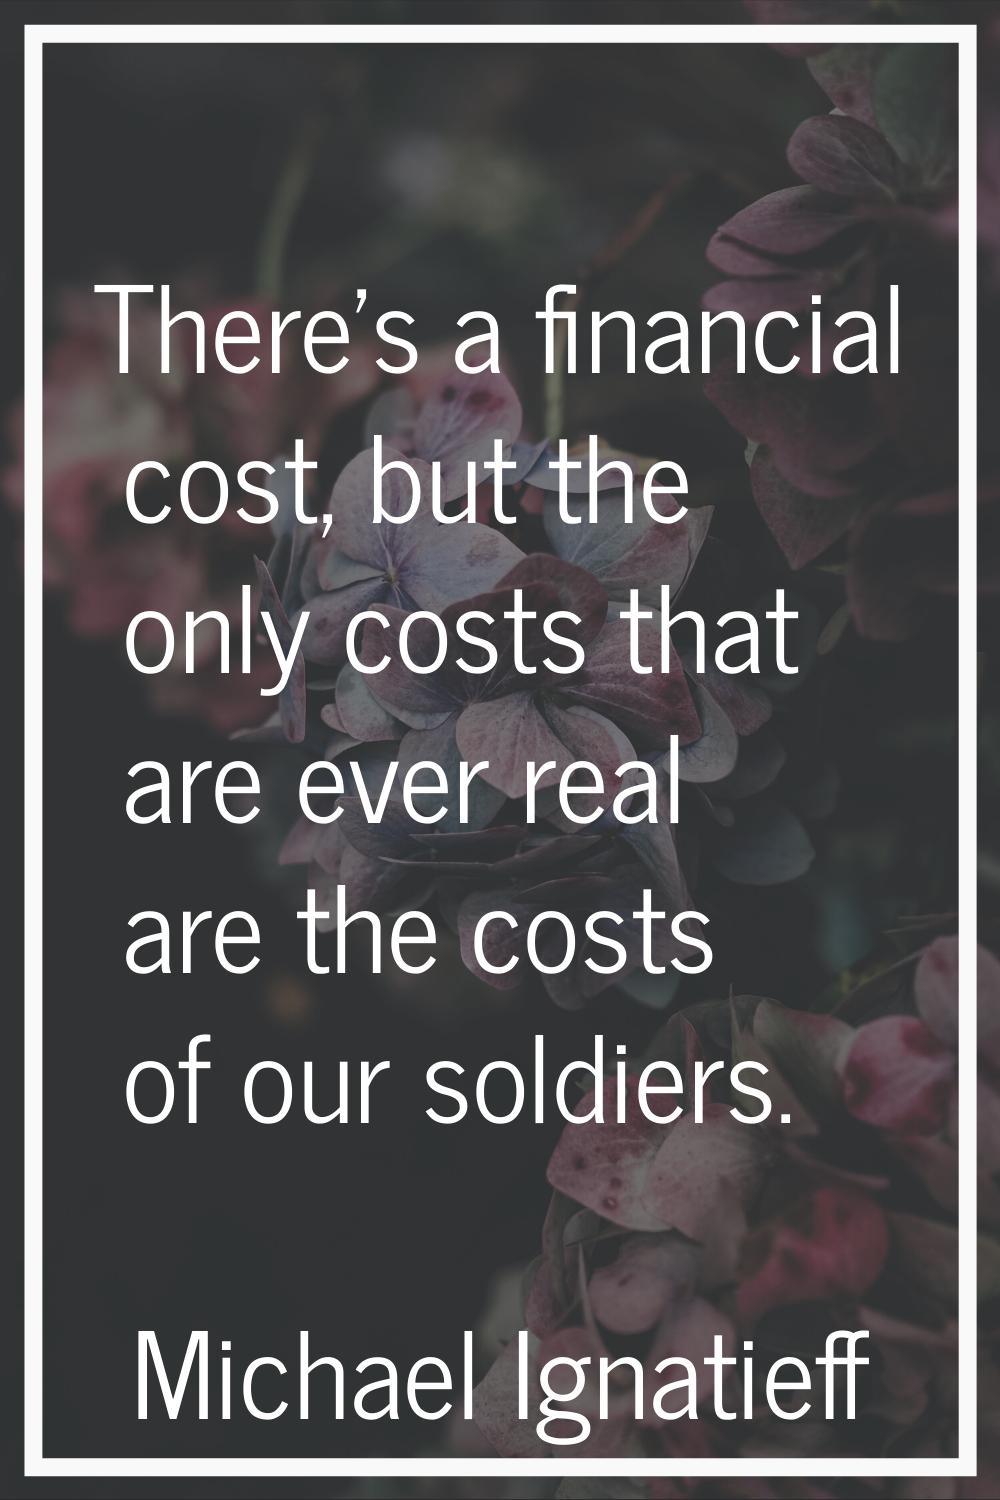 There's a financial cost, but the only costs that are ever real are the costs of our soldiers.